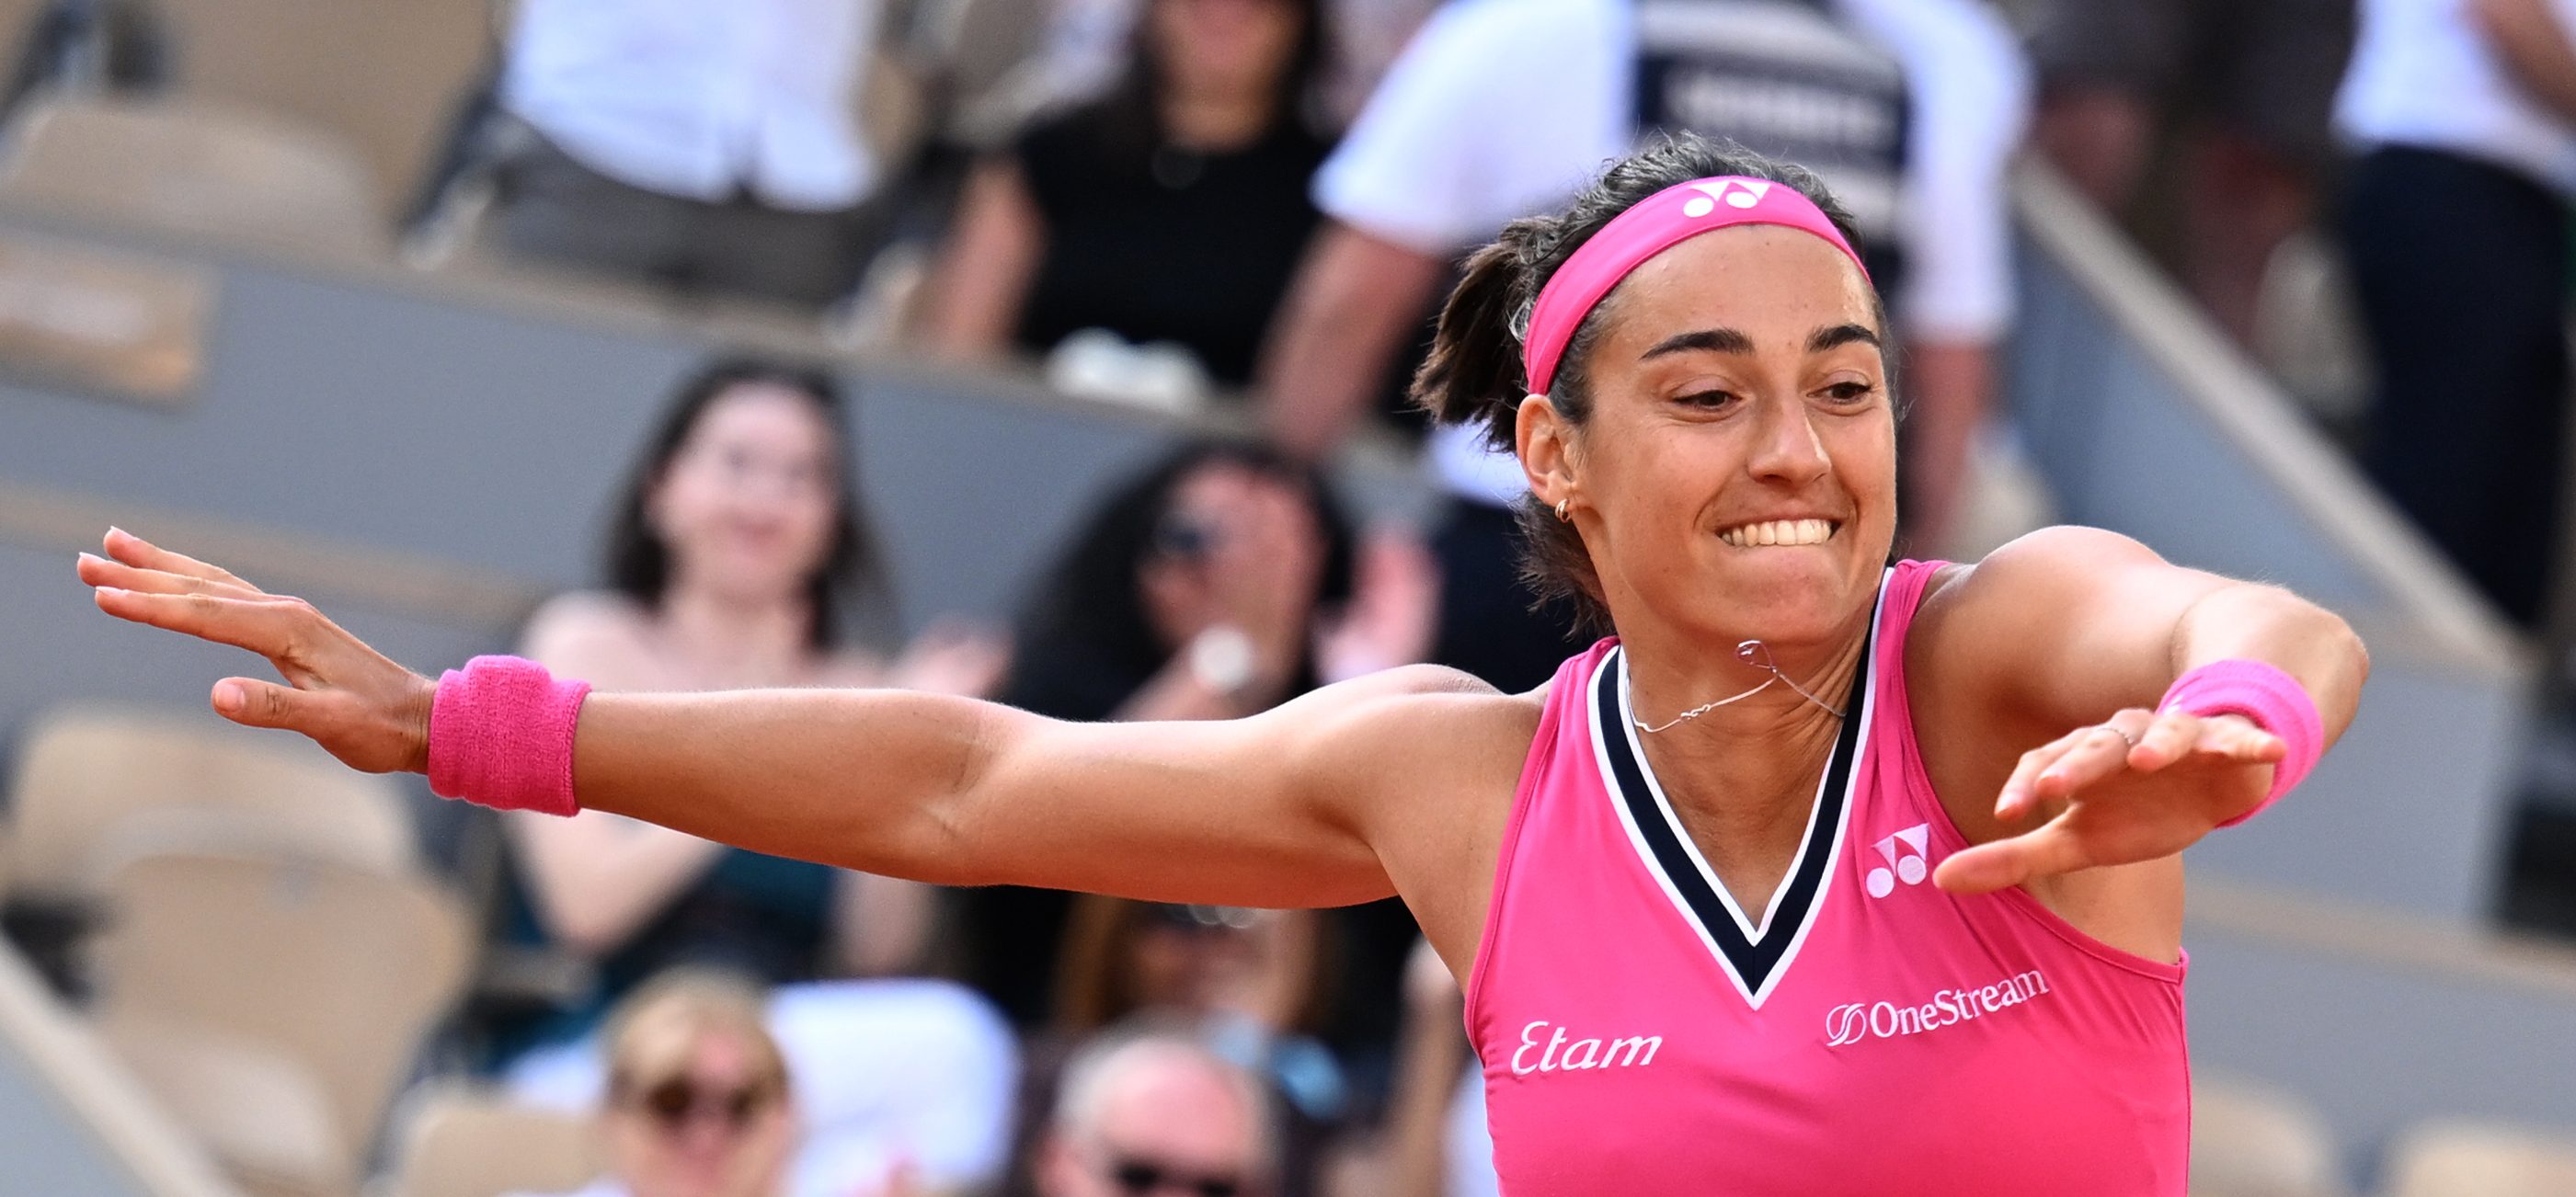 France's Caroline Garcia jumps as she celebrates her victory over China's Wang Xiyu during their women's singles match on day two of the Roland-Garros Open tennis tournament at the Court Philippe-Chatrier in Paris